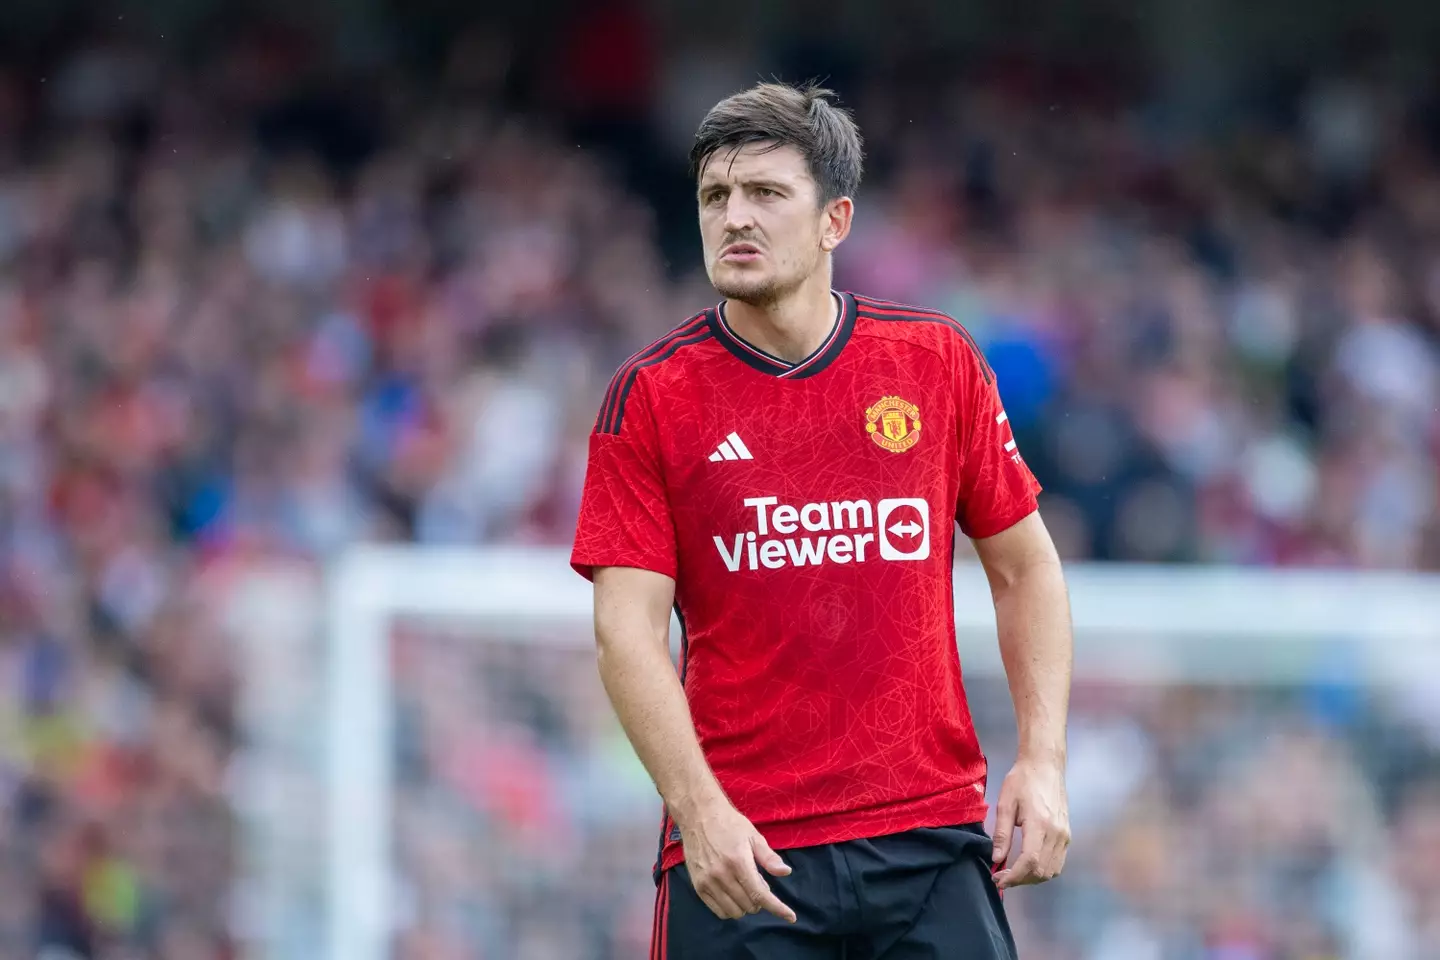 Manchester United defender Harry Maguire is in the England squad (